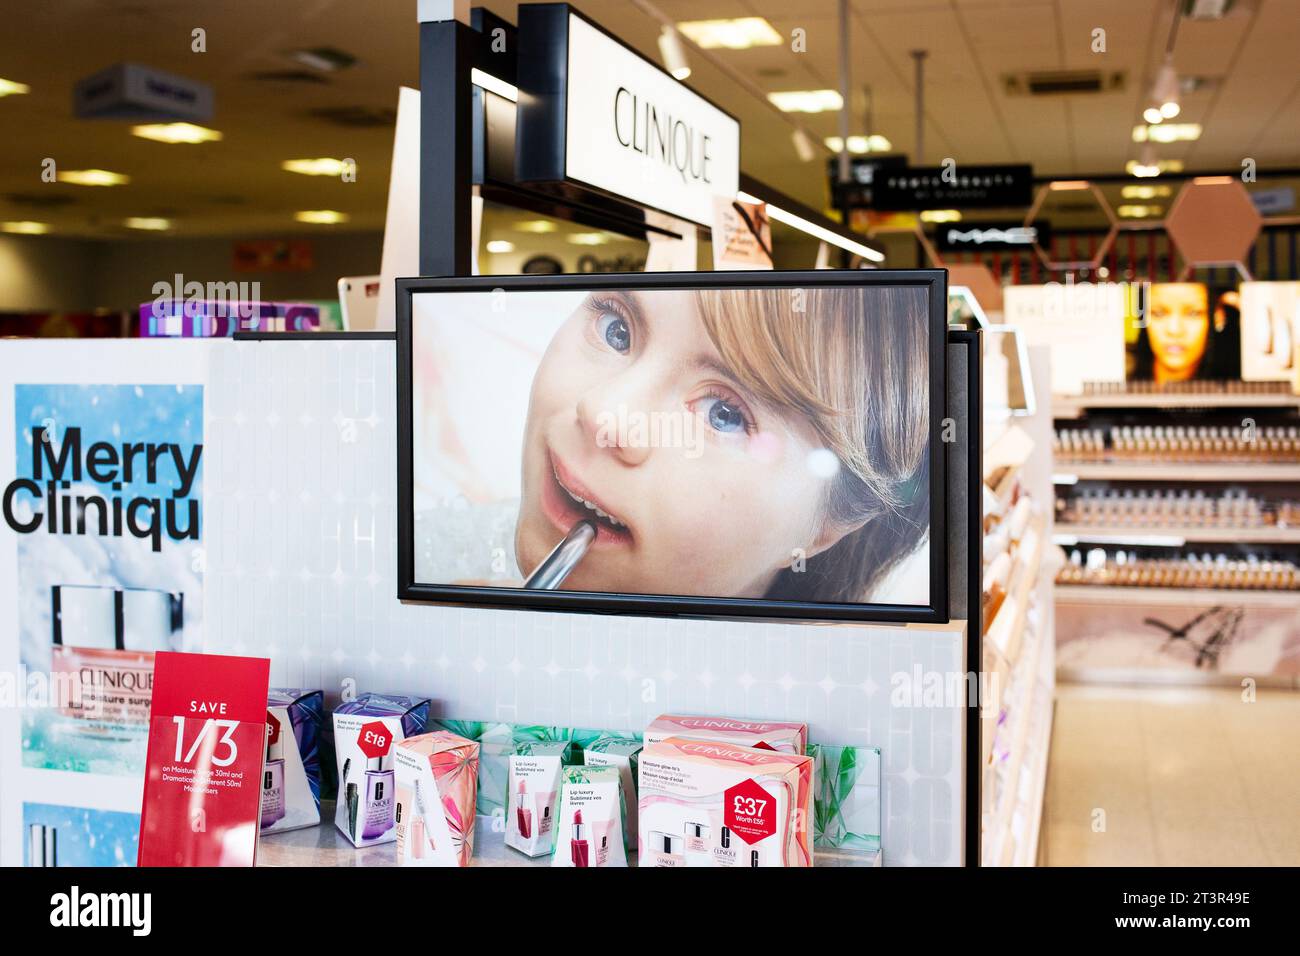 Inclusive cosmetics Christmas advertising for the Clinique brand on TV screen in Boots chemist - Merry Clinique 2023 Stock Photo